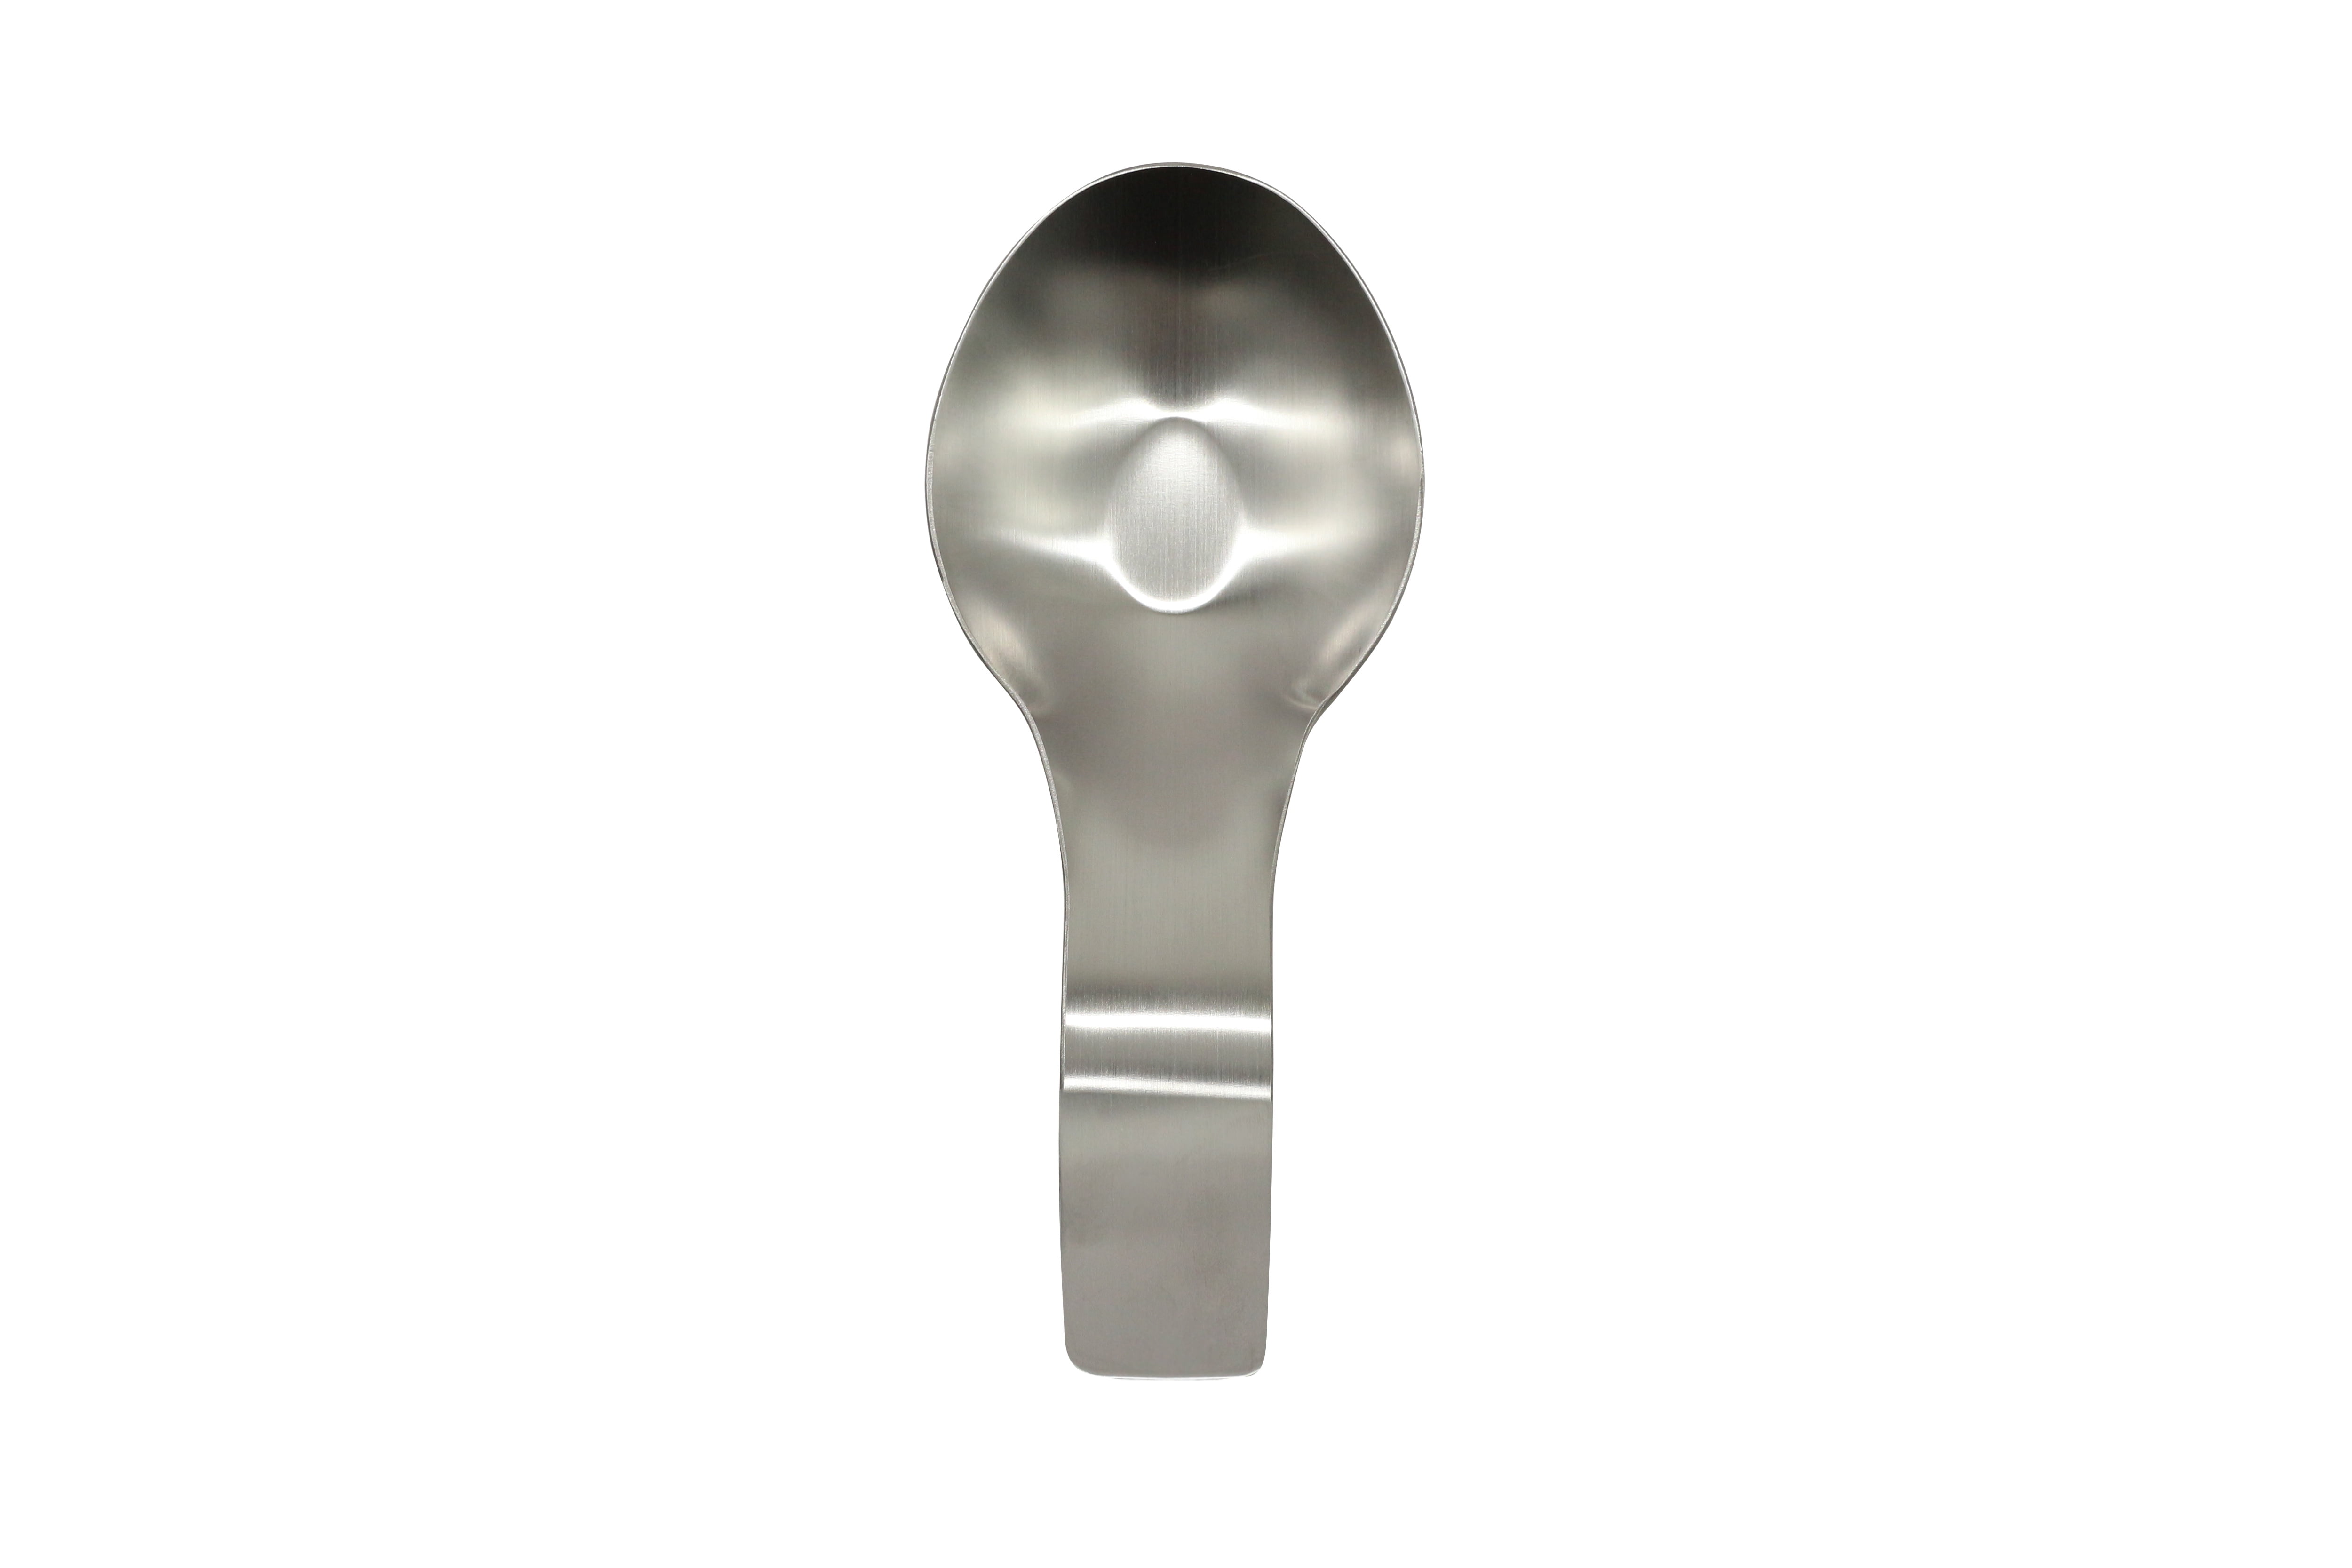 spoon rest, rd stainless WAIT